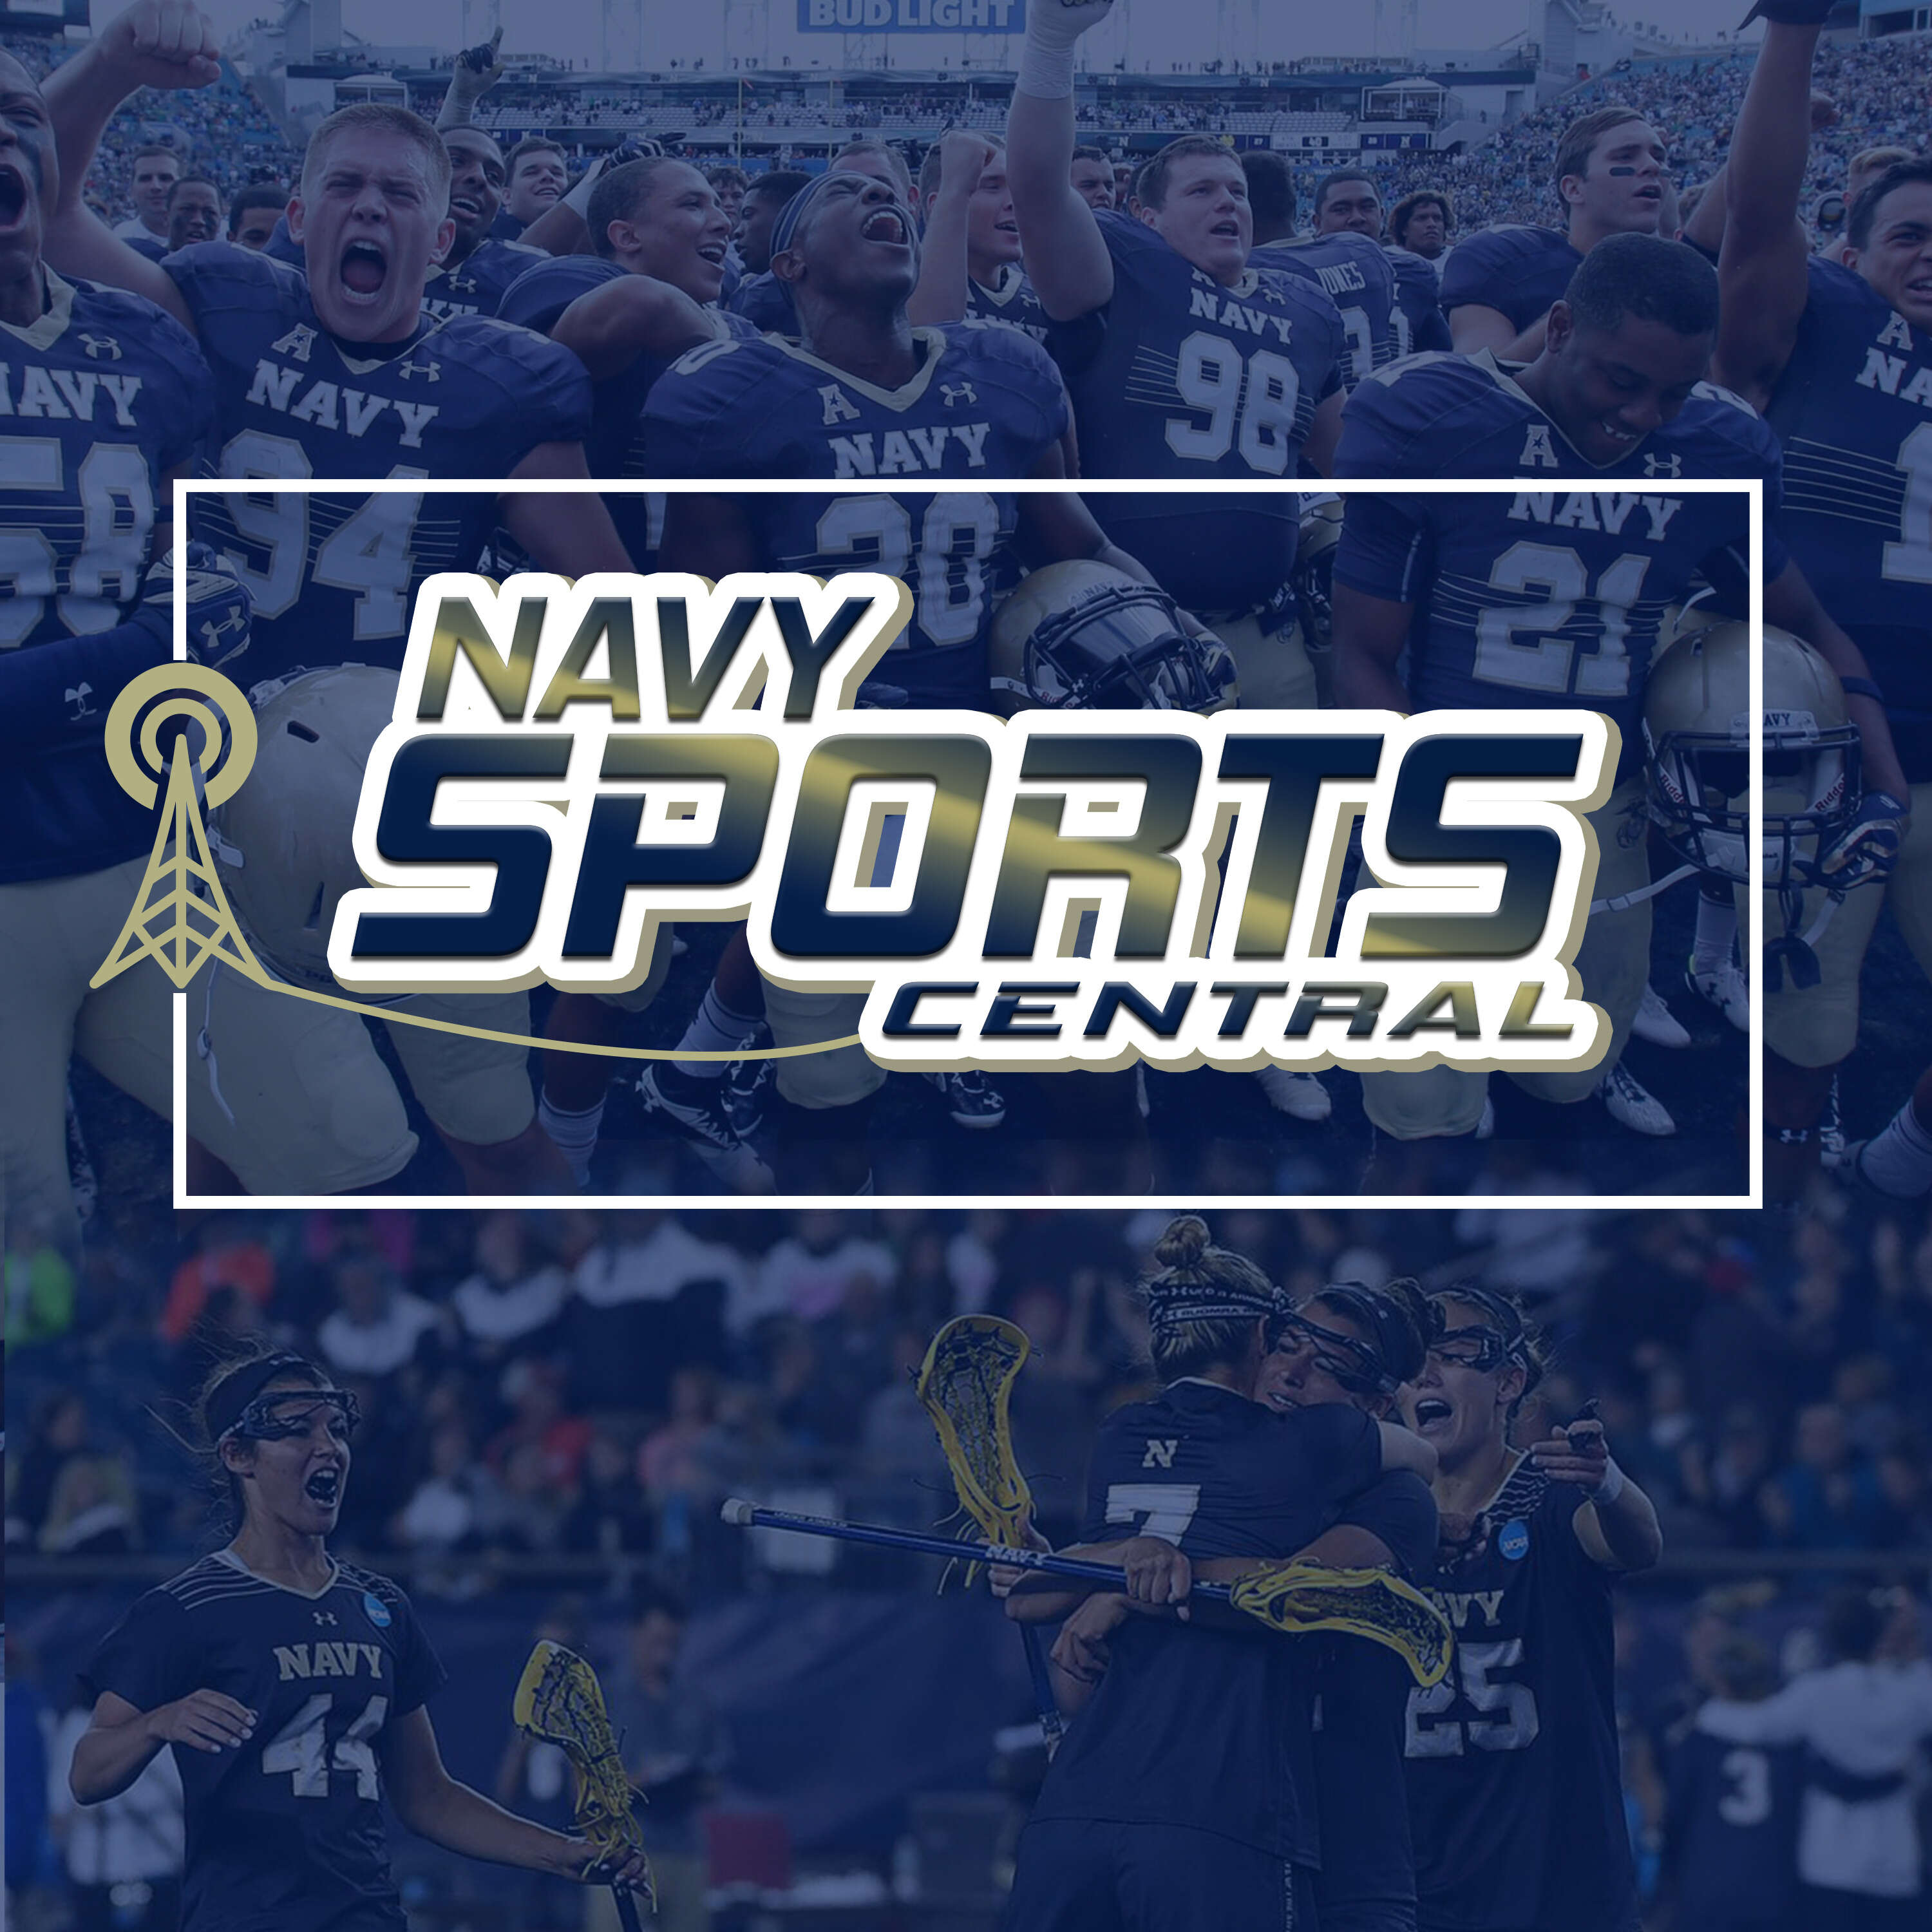 Navy Sports Central